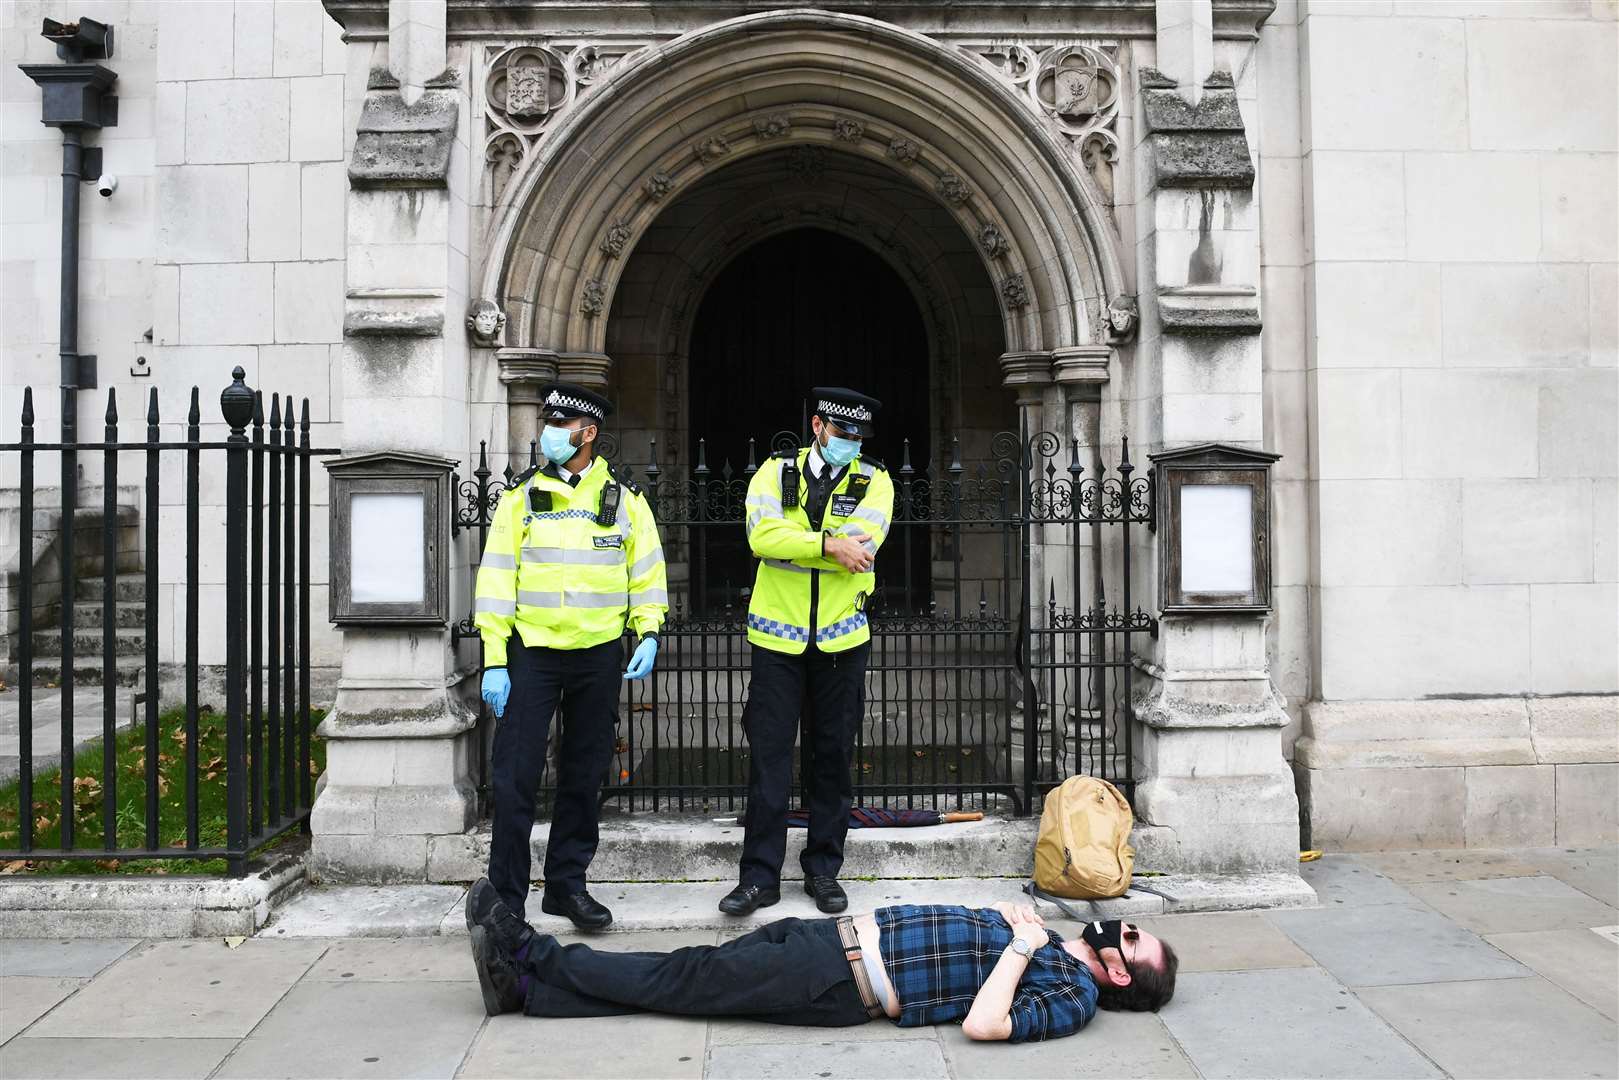 Police stand beside a laying protester during an Extinction Rebellion demonstration in central London (Stefan Rousseau/PA)